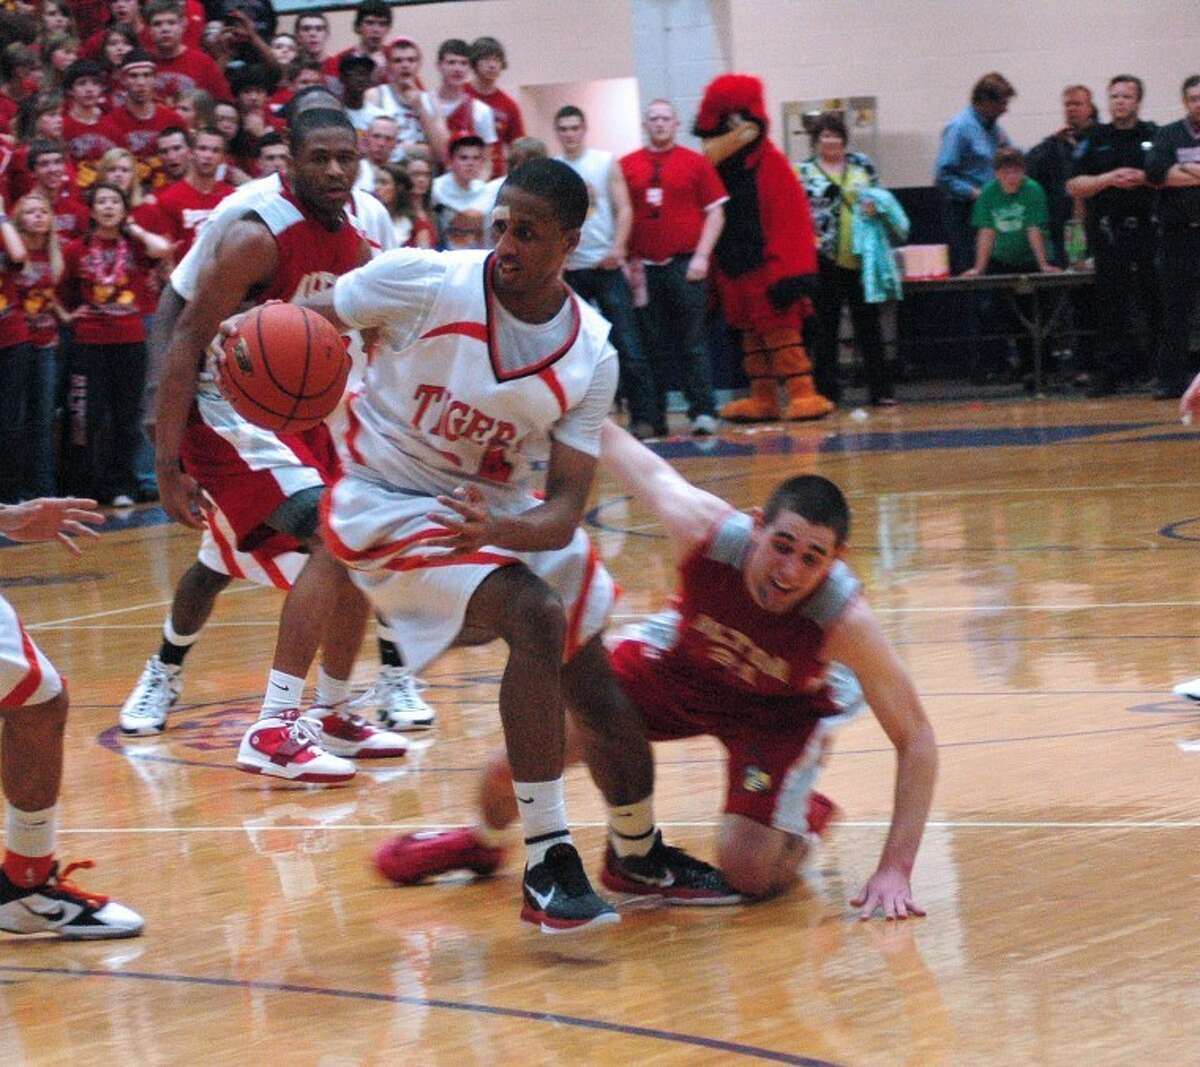 Tiger Virtis Lewis picks up a loose ball and moves past an Alton defender late in the fourth quarter.